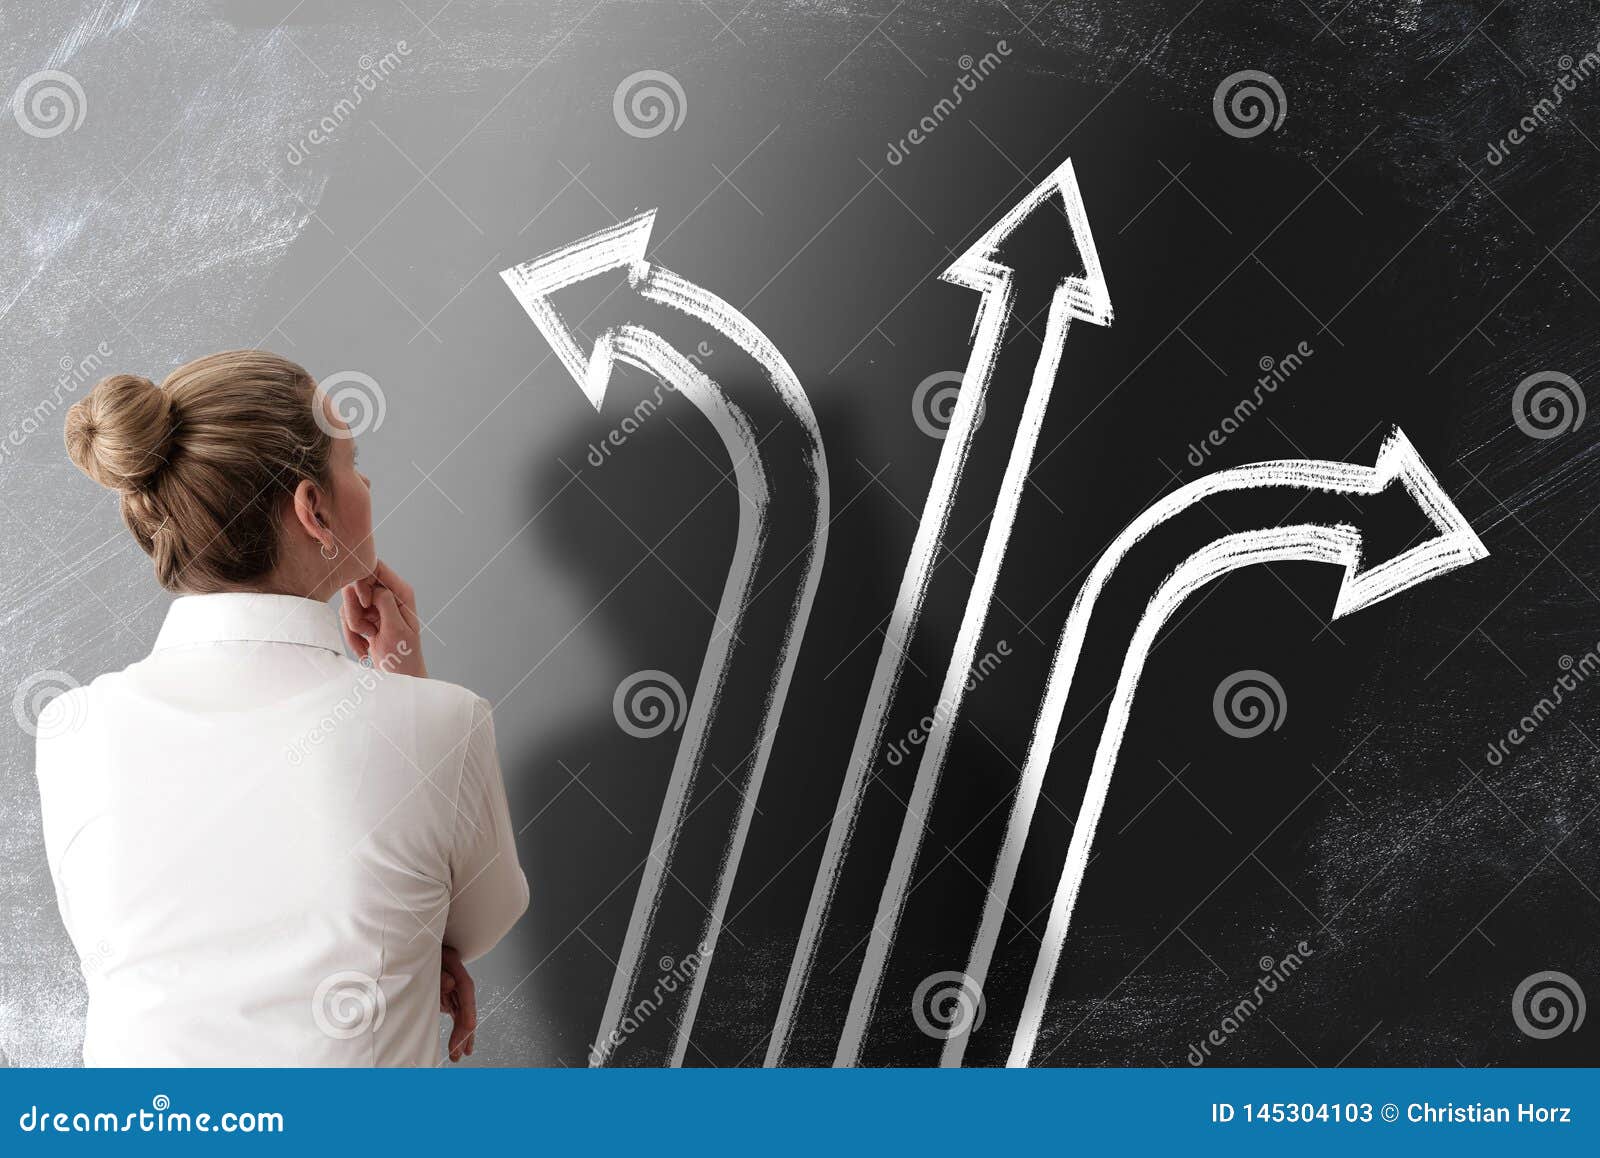 decision making concept with rear view of woman looking at chalkboard with arrows pointing in different directions